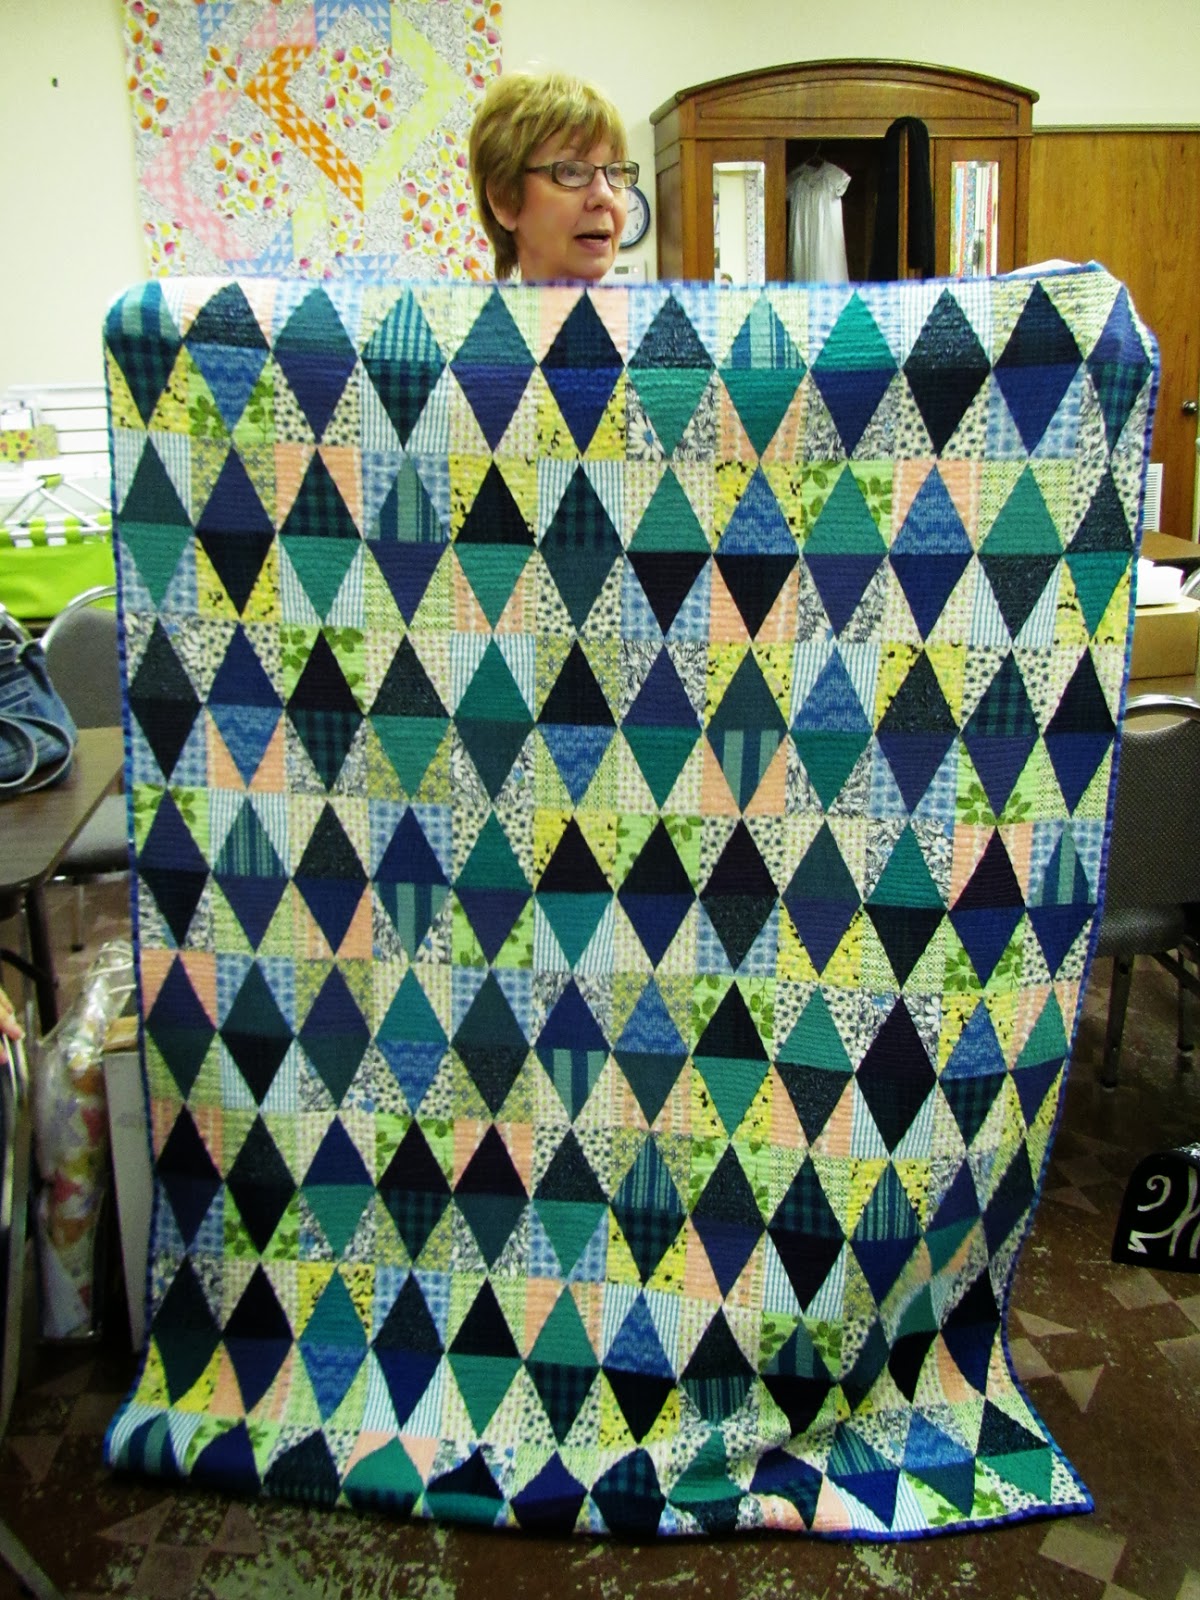 vintage feed sacks in equalateral triangle quilt by Marty Mason